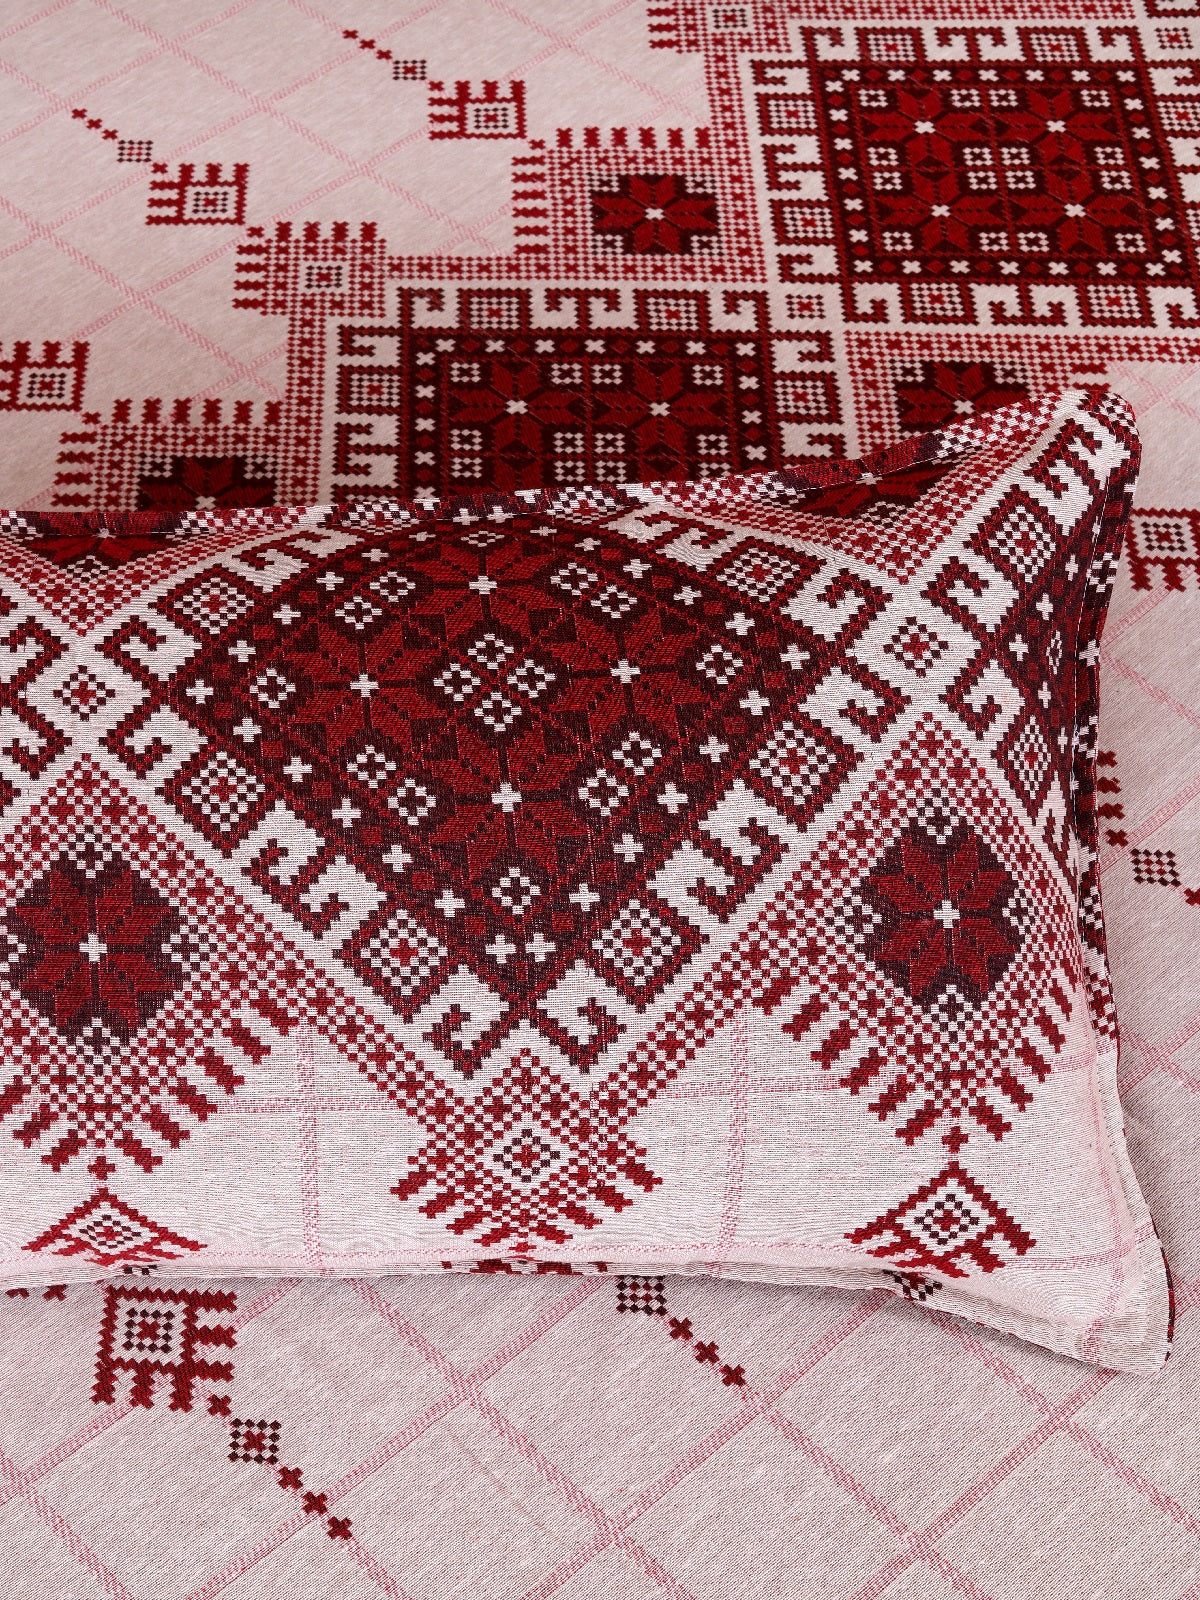 Beige & Maroon Ethnic Motifs Patterned Reversible Double Bed Cover With 2 Pillow Covers